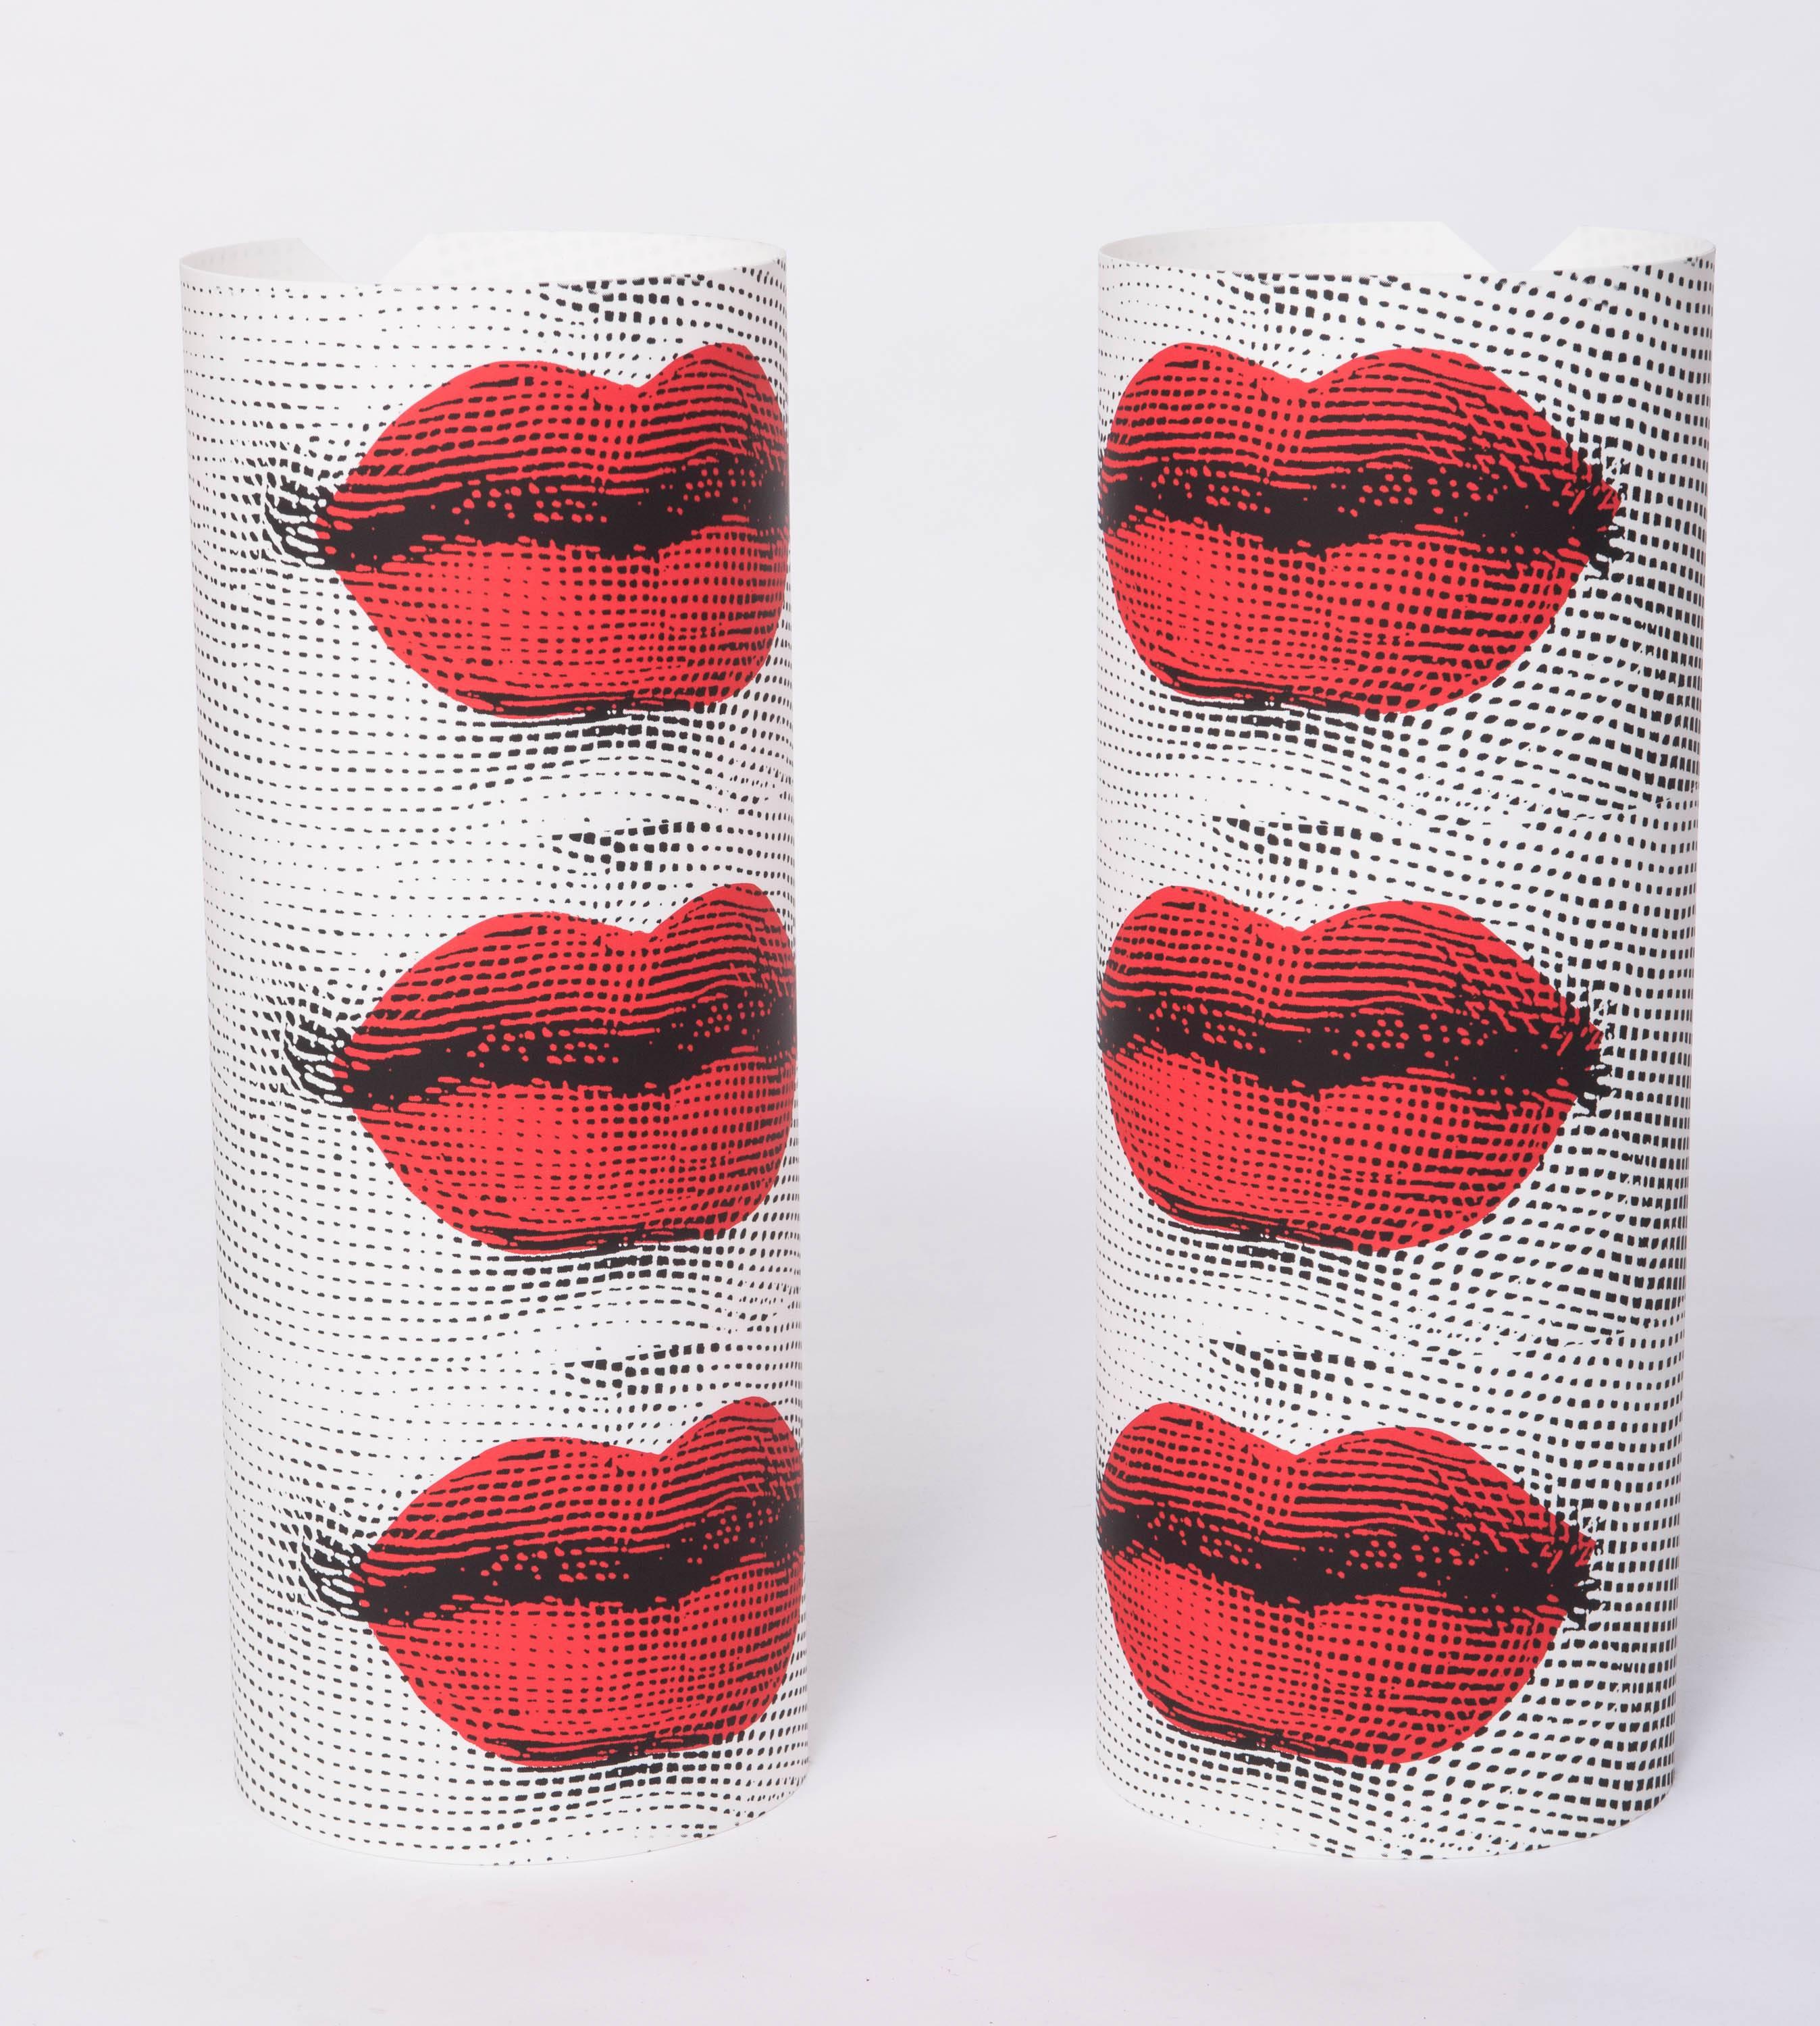 A pair of table lamps by Barnaba Fornasetti
“Kisses”
Printed and colored perspex
Made by Fornasetti and Antonangeli Iluminazione. Paderno Dugano.
Italy, 1995
Measures: 60 cm high x 24 cm wide x 23 cm deep.
    